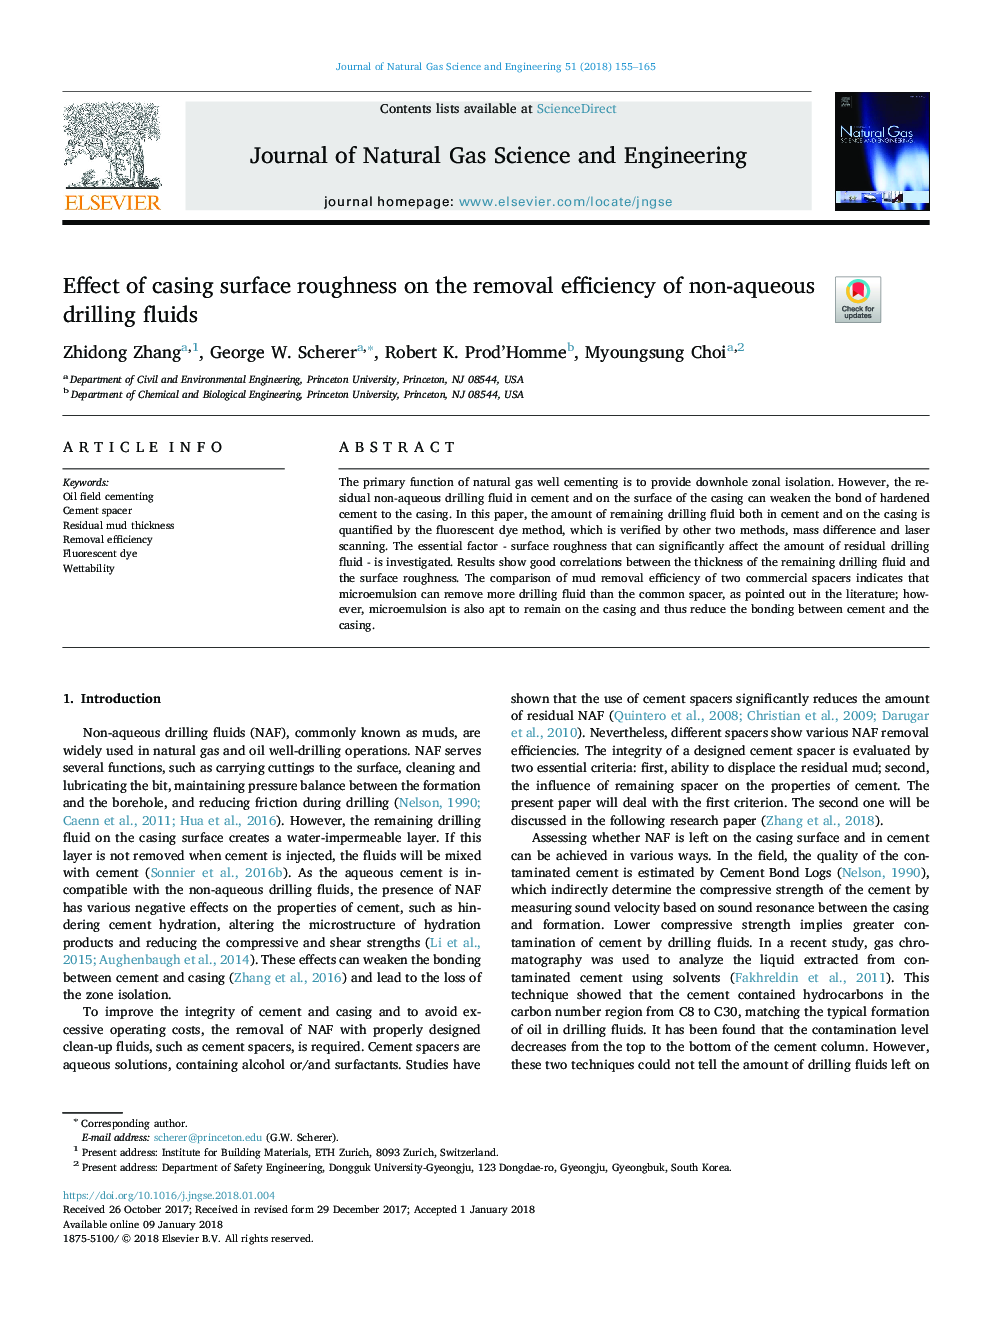 Effect of casing surface roughness on the removal efficiency of non-aqueous drilling fluids